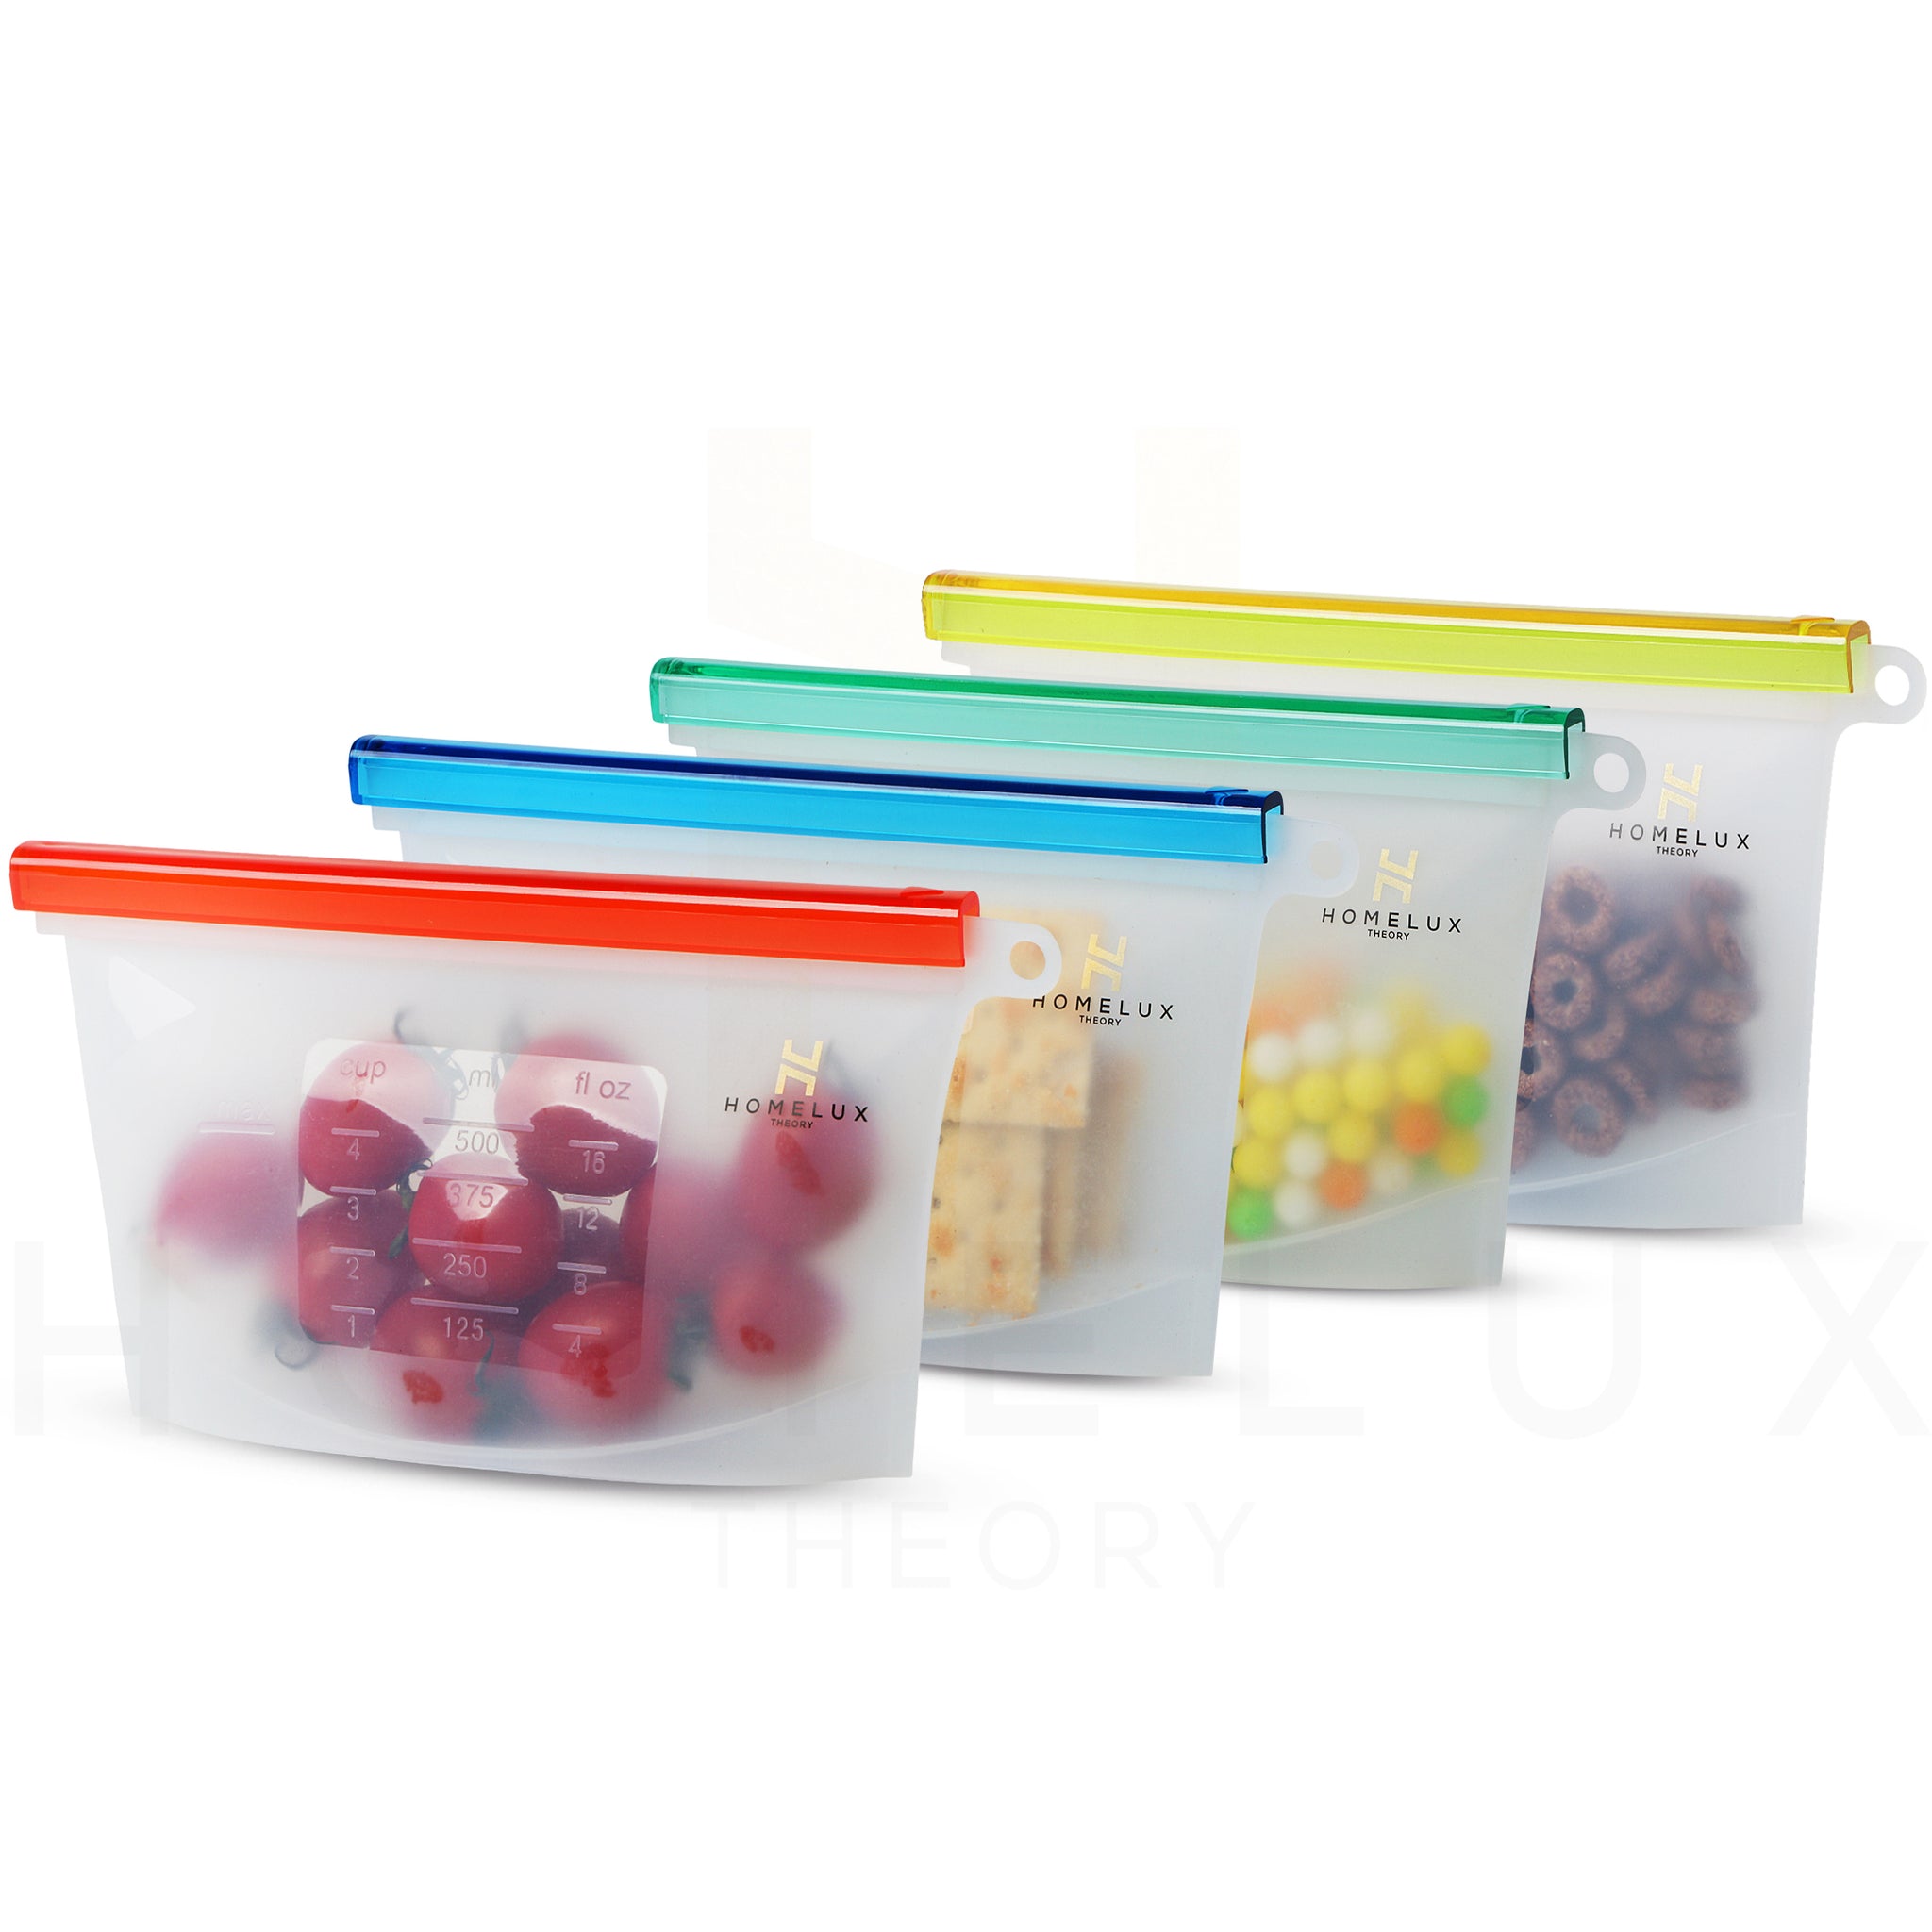 Silicone Food Storage Containers Set (set of 4)